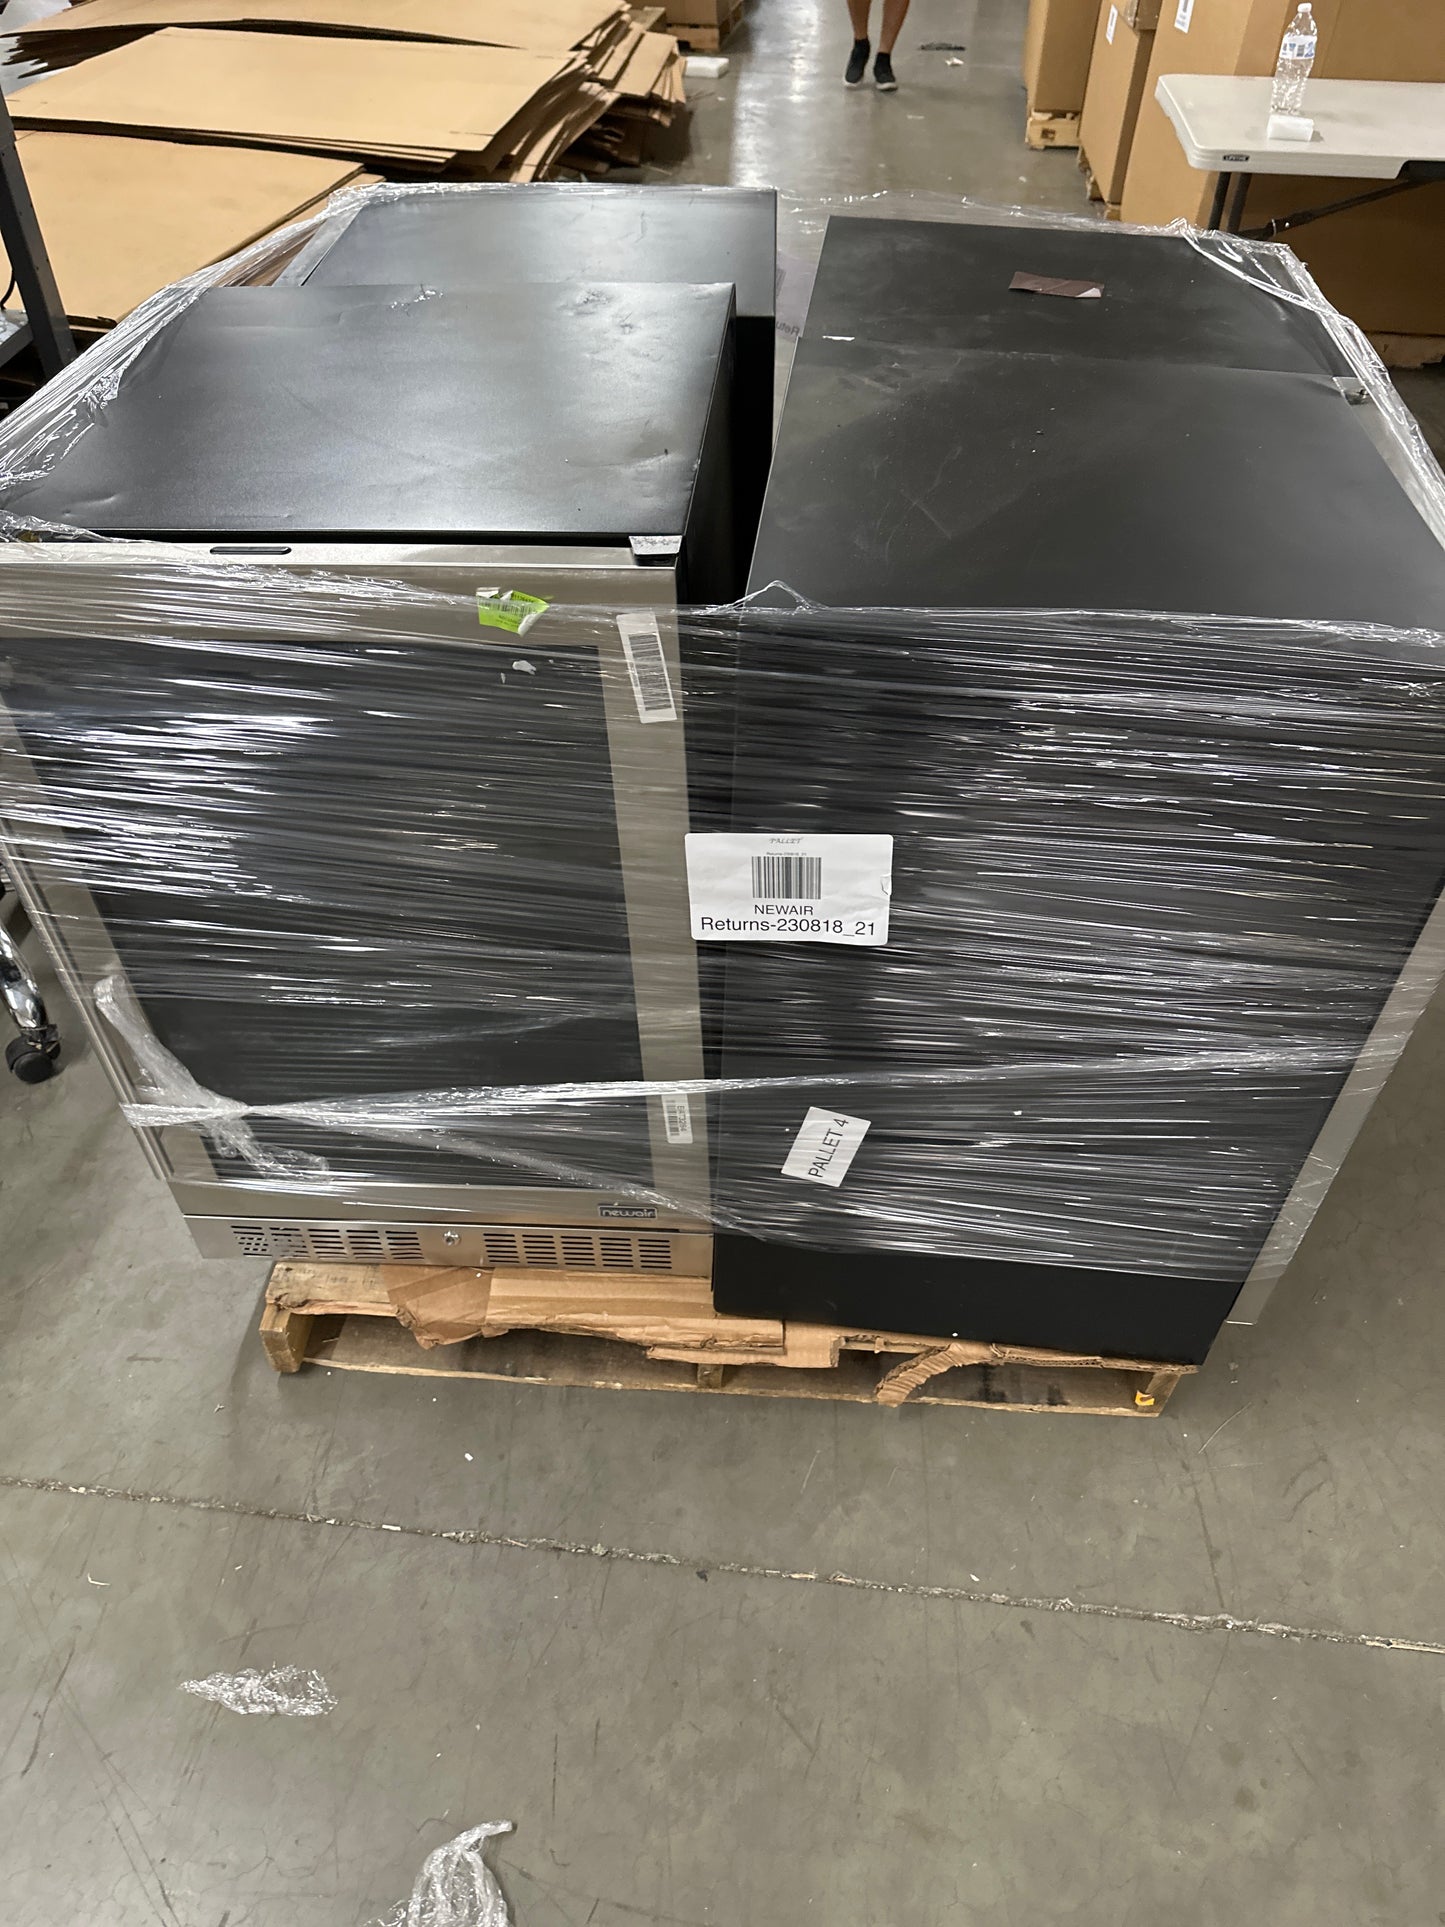 Liquidation Pallet of Compact Fridges and Compact Humidors, Pallet-DAH